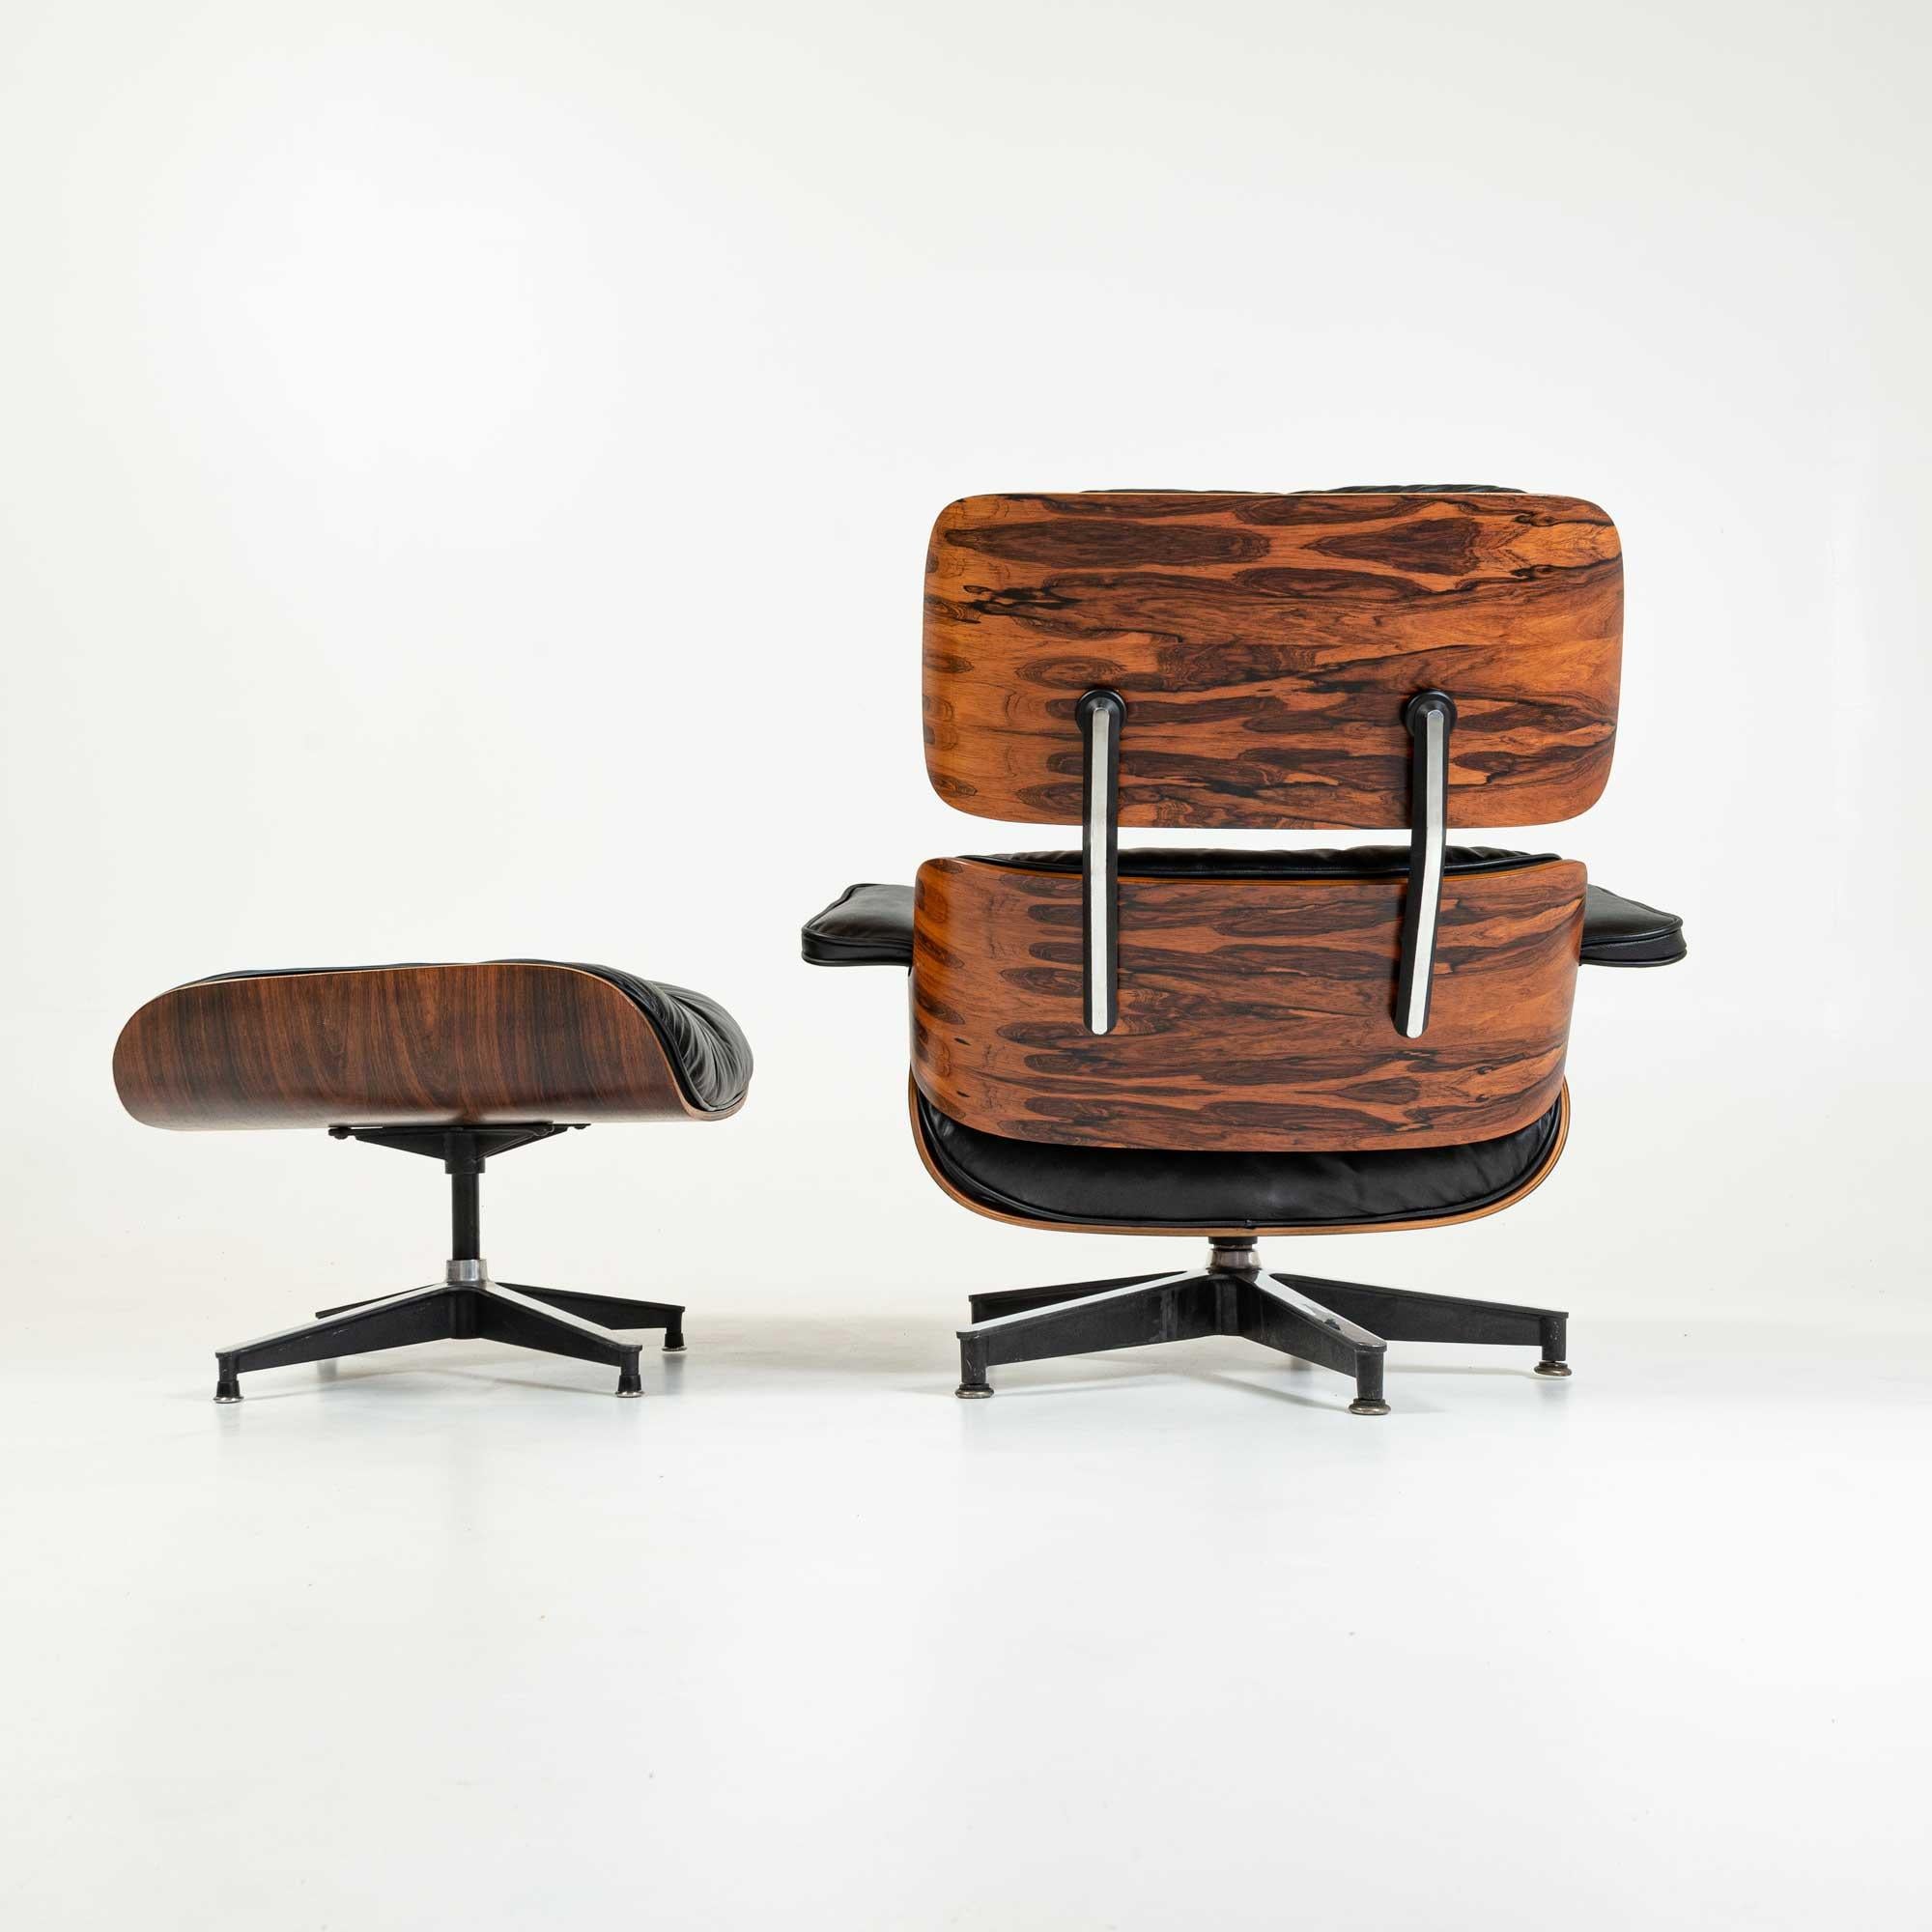 This extremely rare collectible is one of the early known productions of the 1956 Eames lounge chair with ottoman, non-stamped frame. In classic black and rosewood lacquered shell, this piece has been professionally restored and includes all the